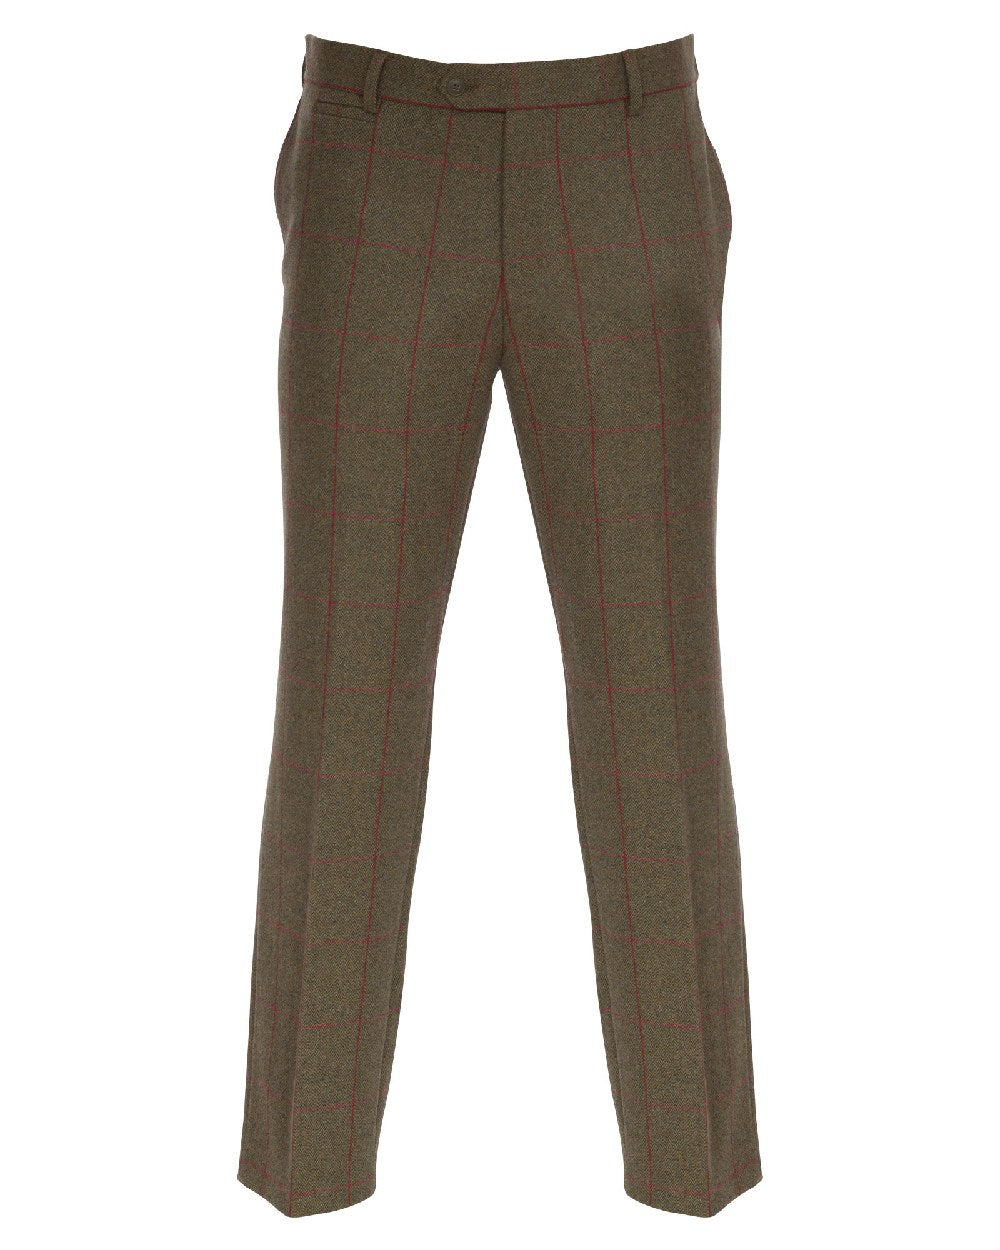 Alan Paine Combrook Mens Trousers in Sage 